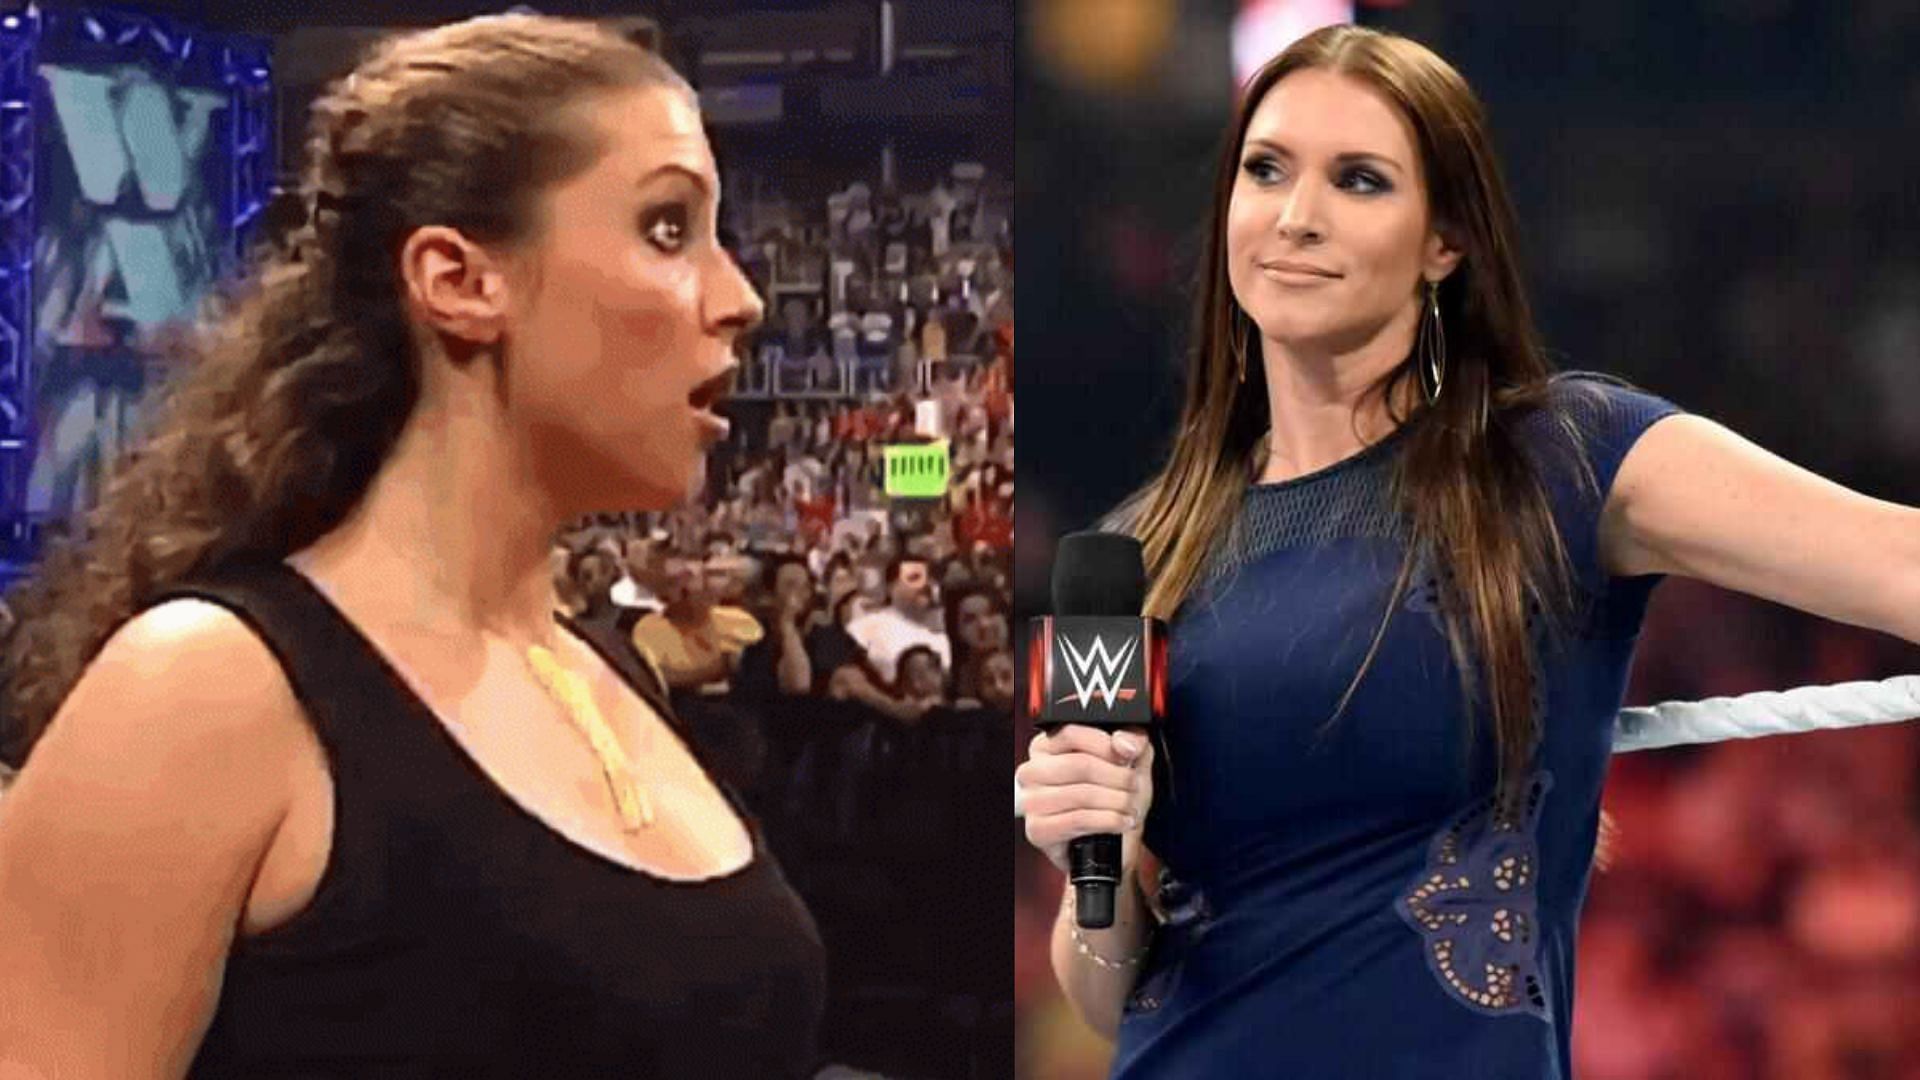 Stephanie McMahon was amazed by the superstar